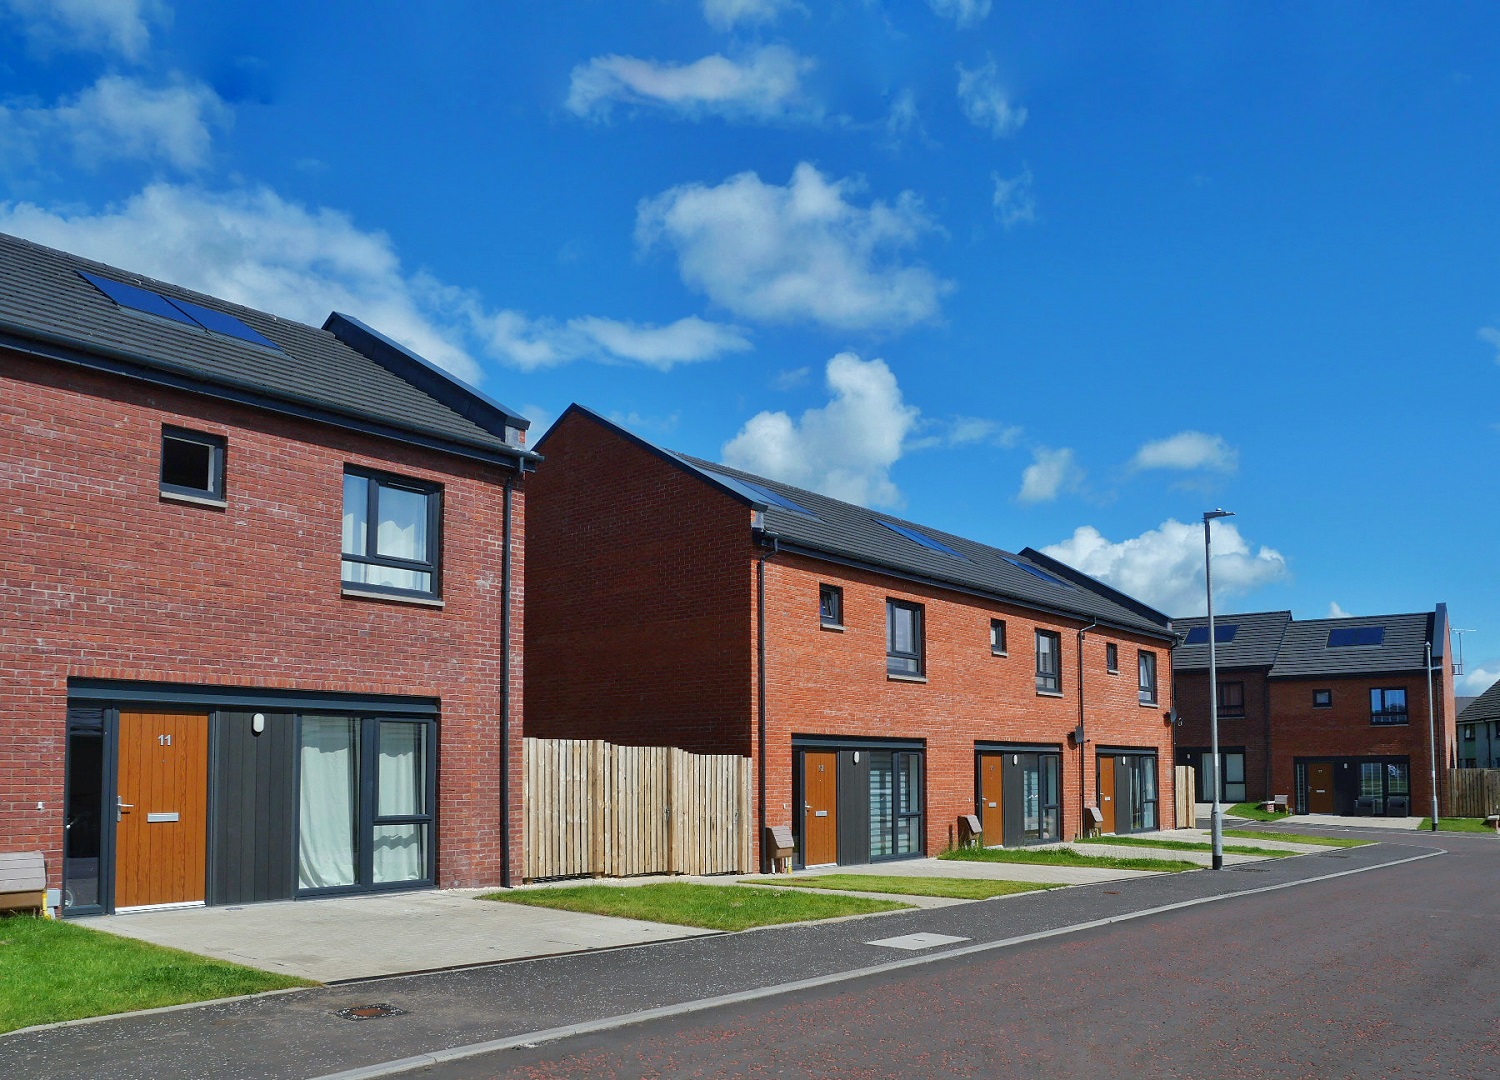 79 inclusive council homes completed in Kilwinning